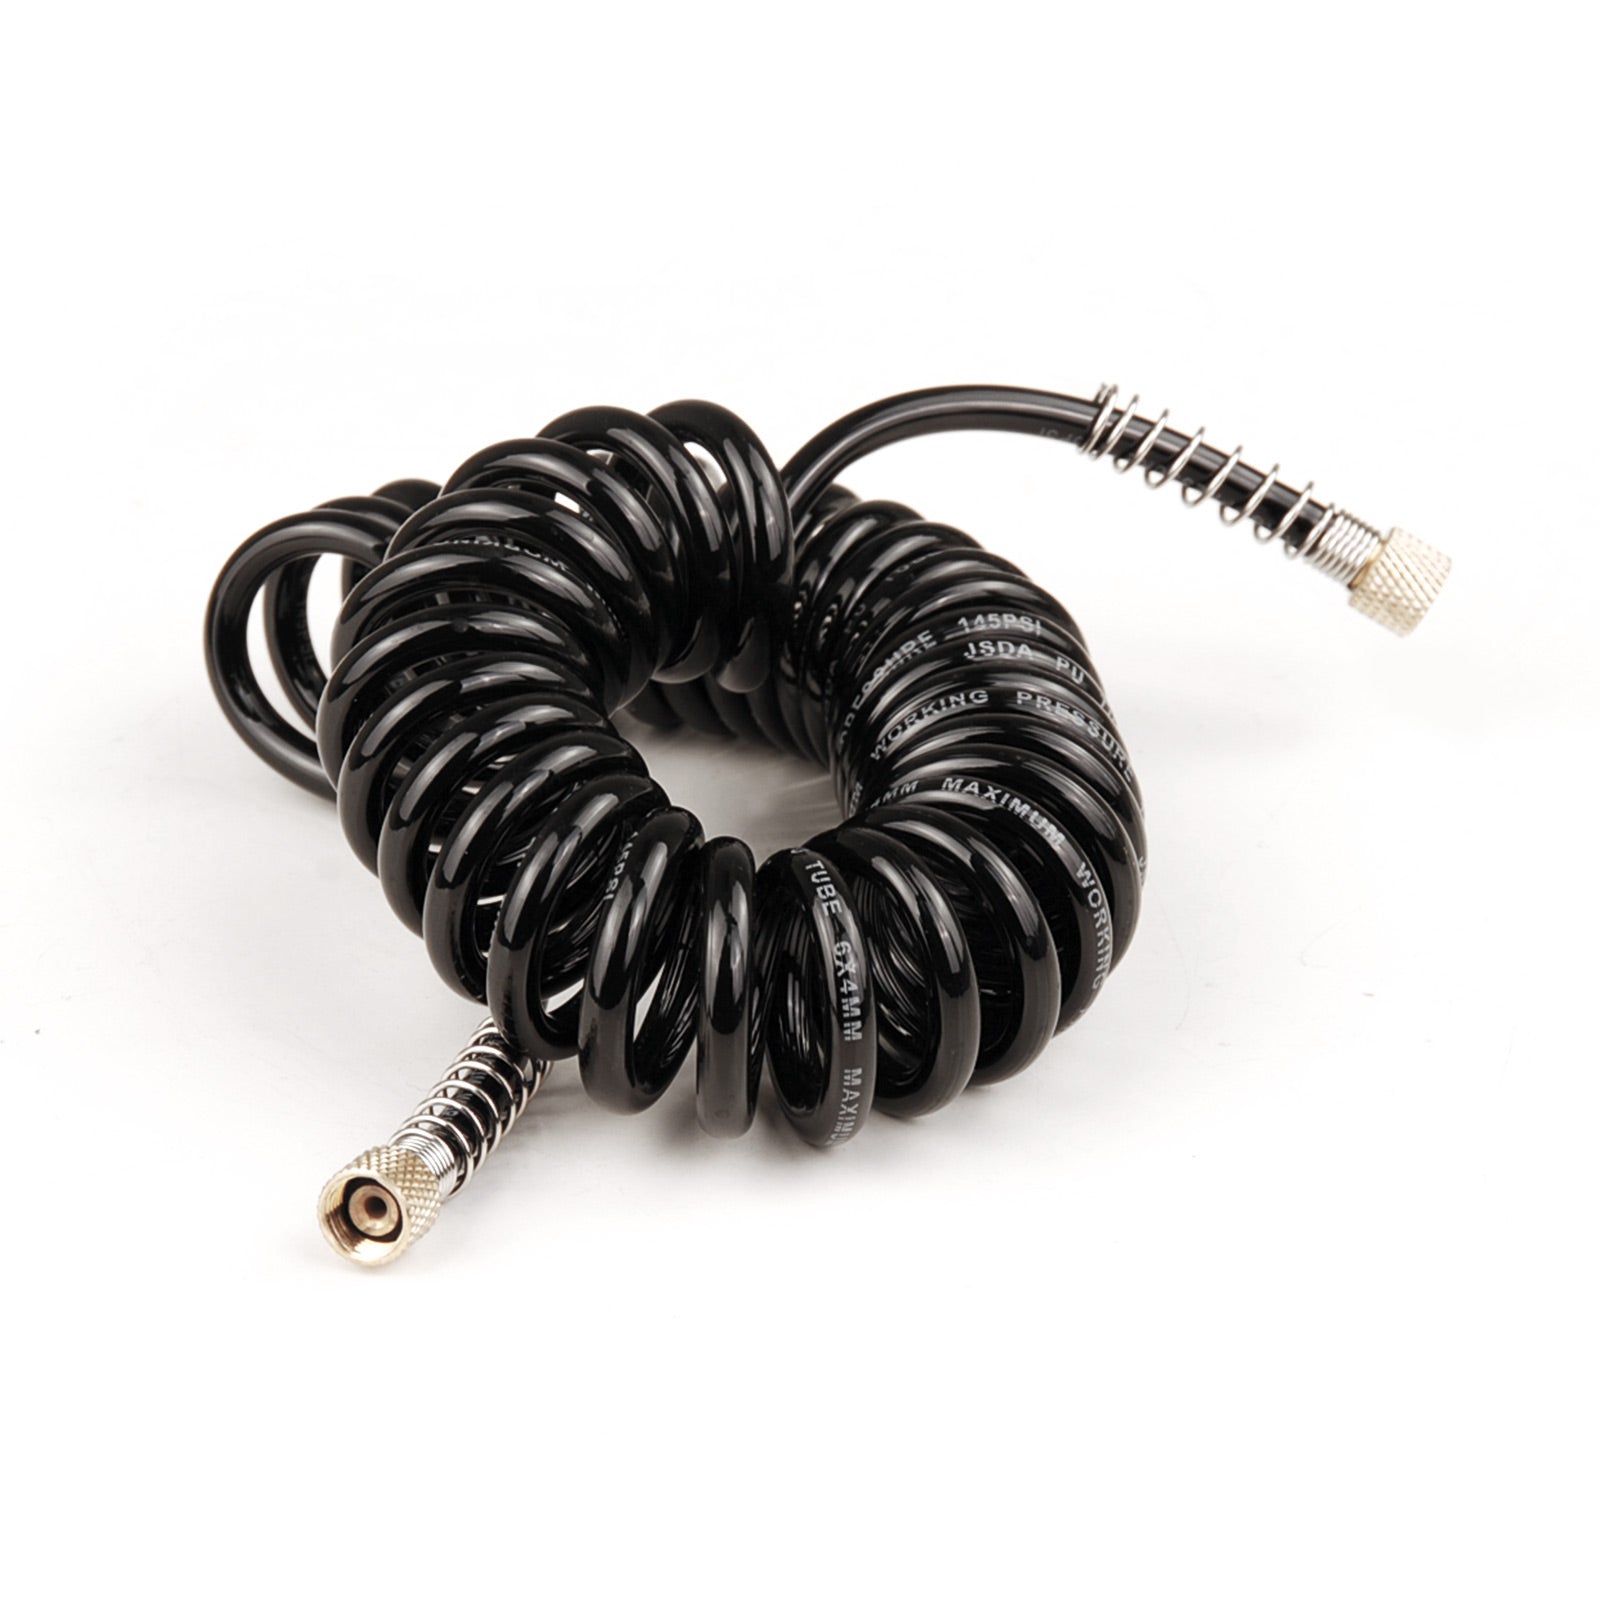 Dynamic Power Air Brush Hose Coiled Retractable Compressor 1/8in 3M - SILBERSHELL